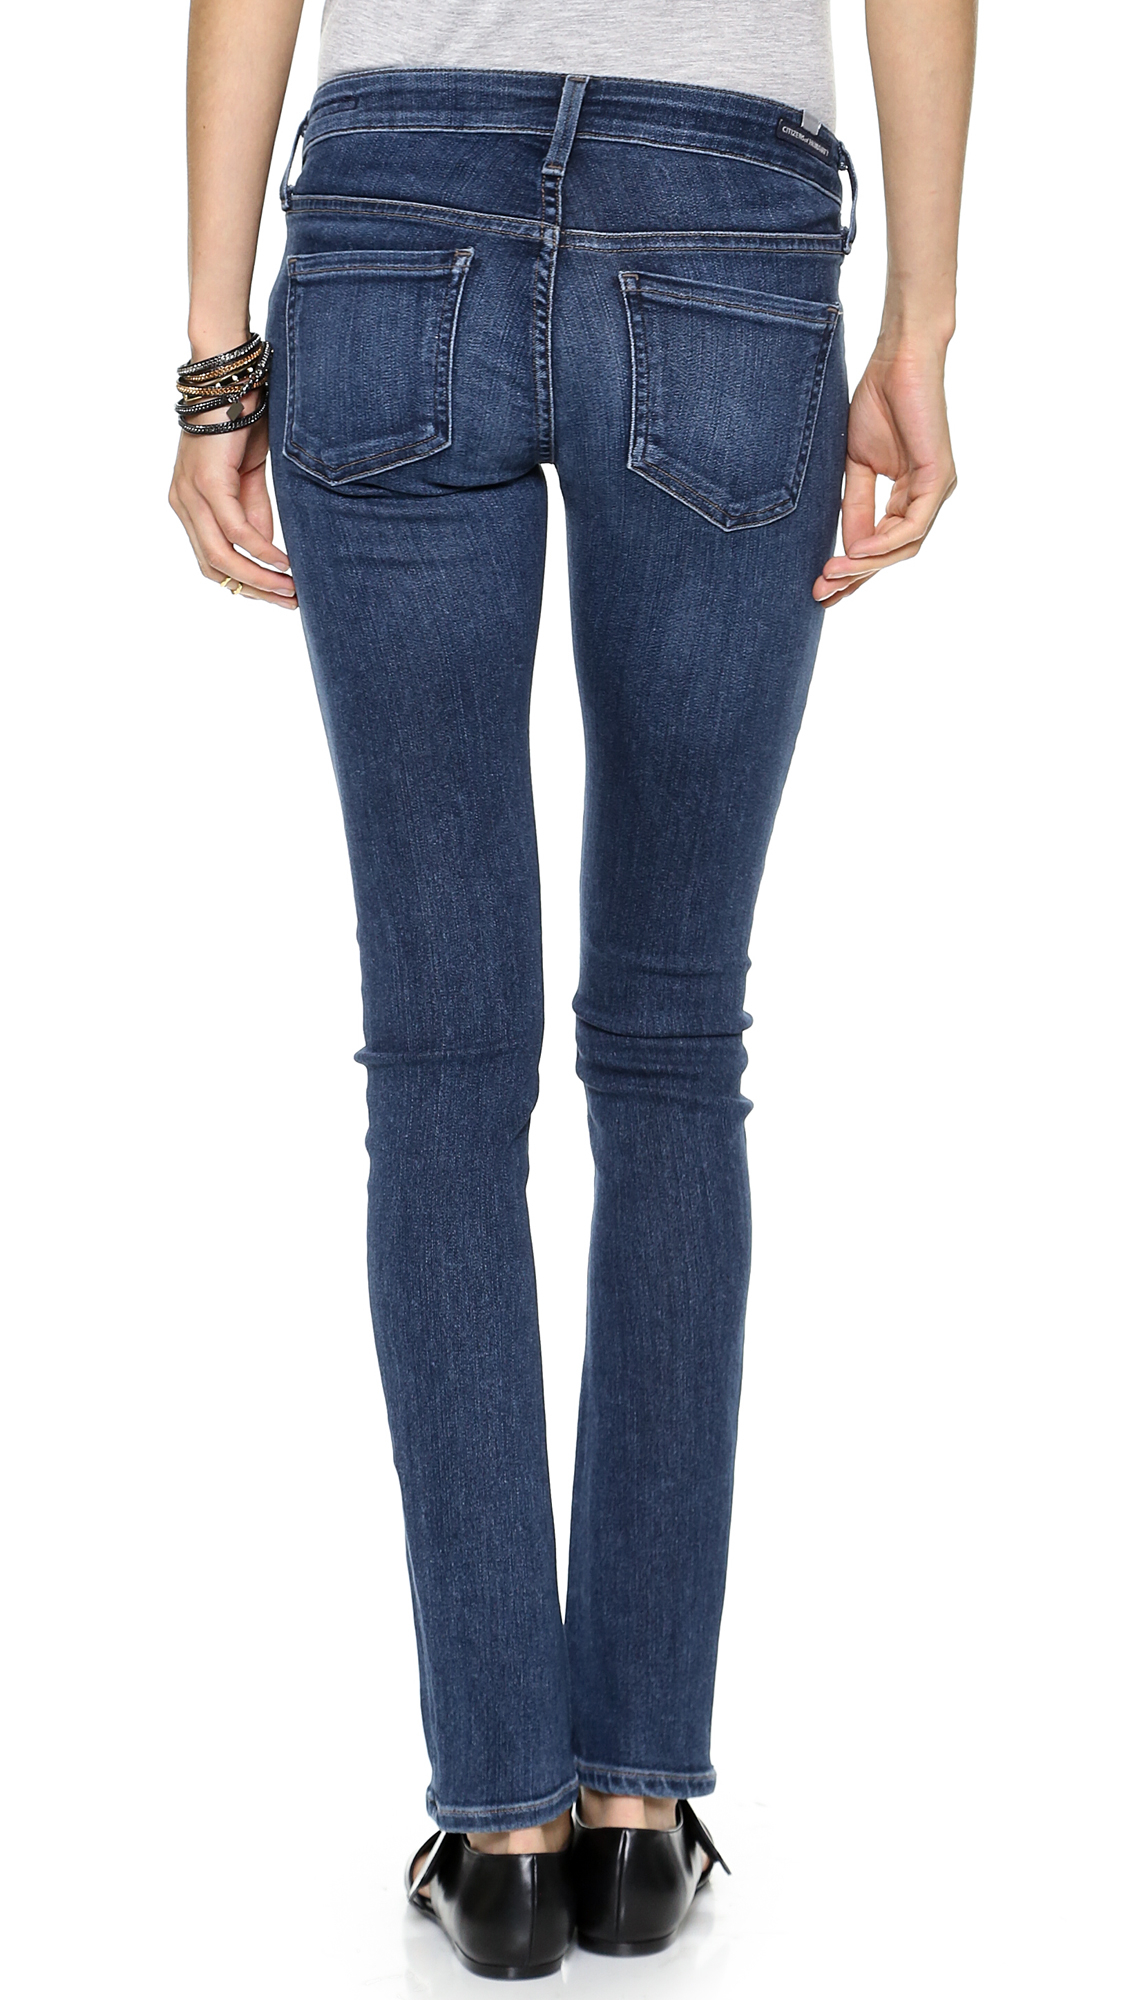 Citizens of Humanity Racer Skinny Jeans - Cruz in Blue - Lyst